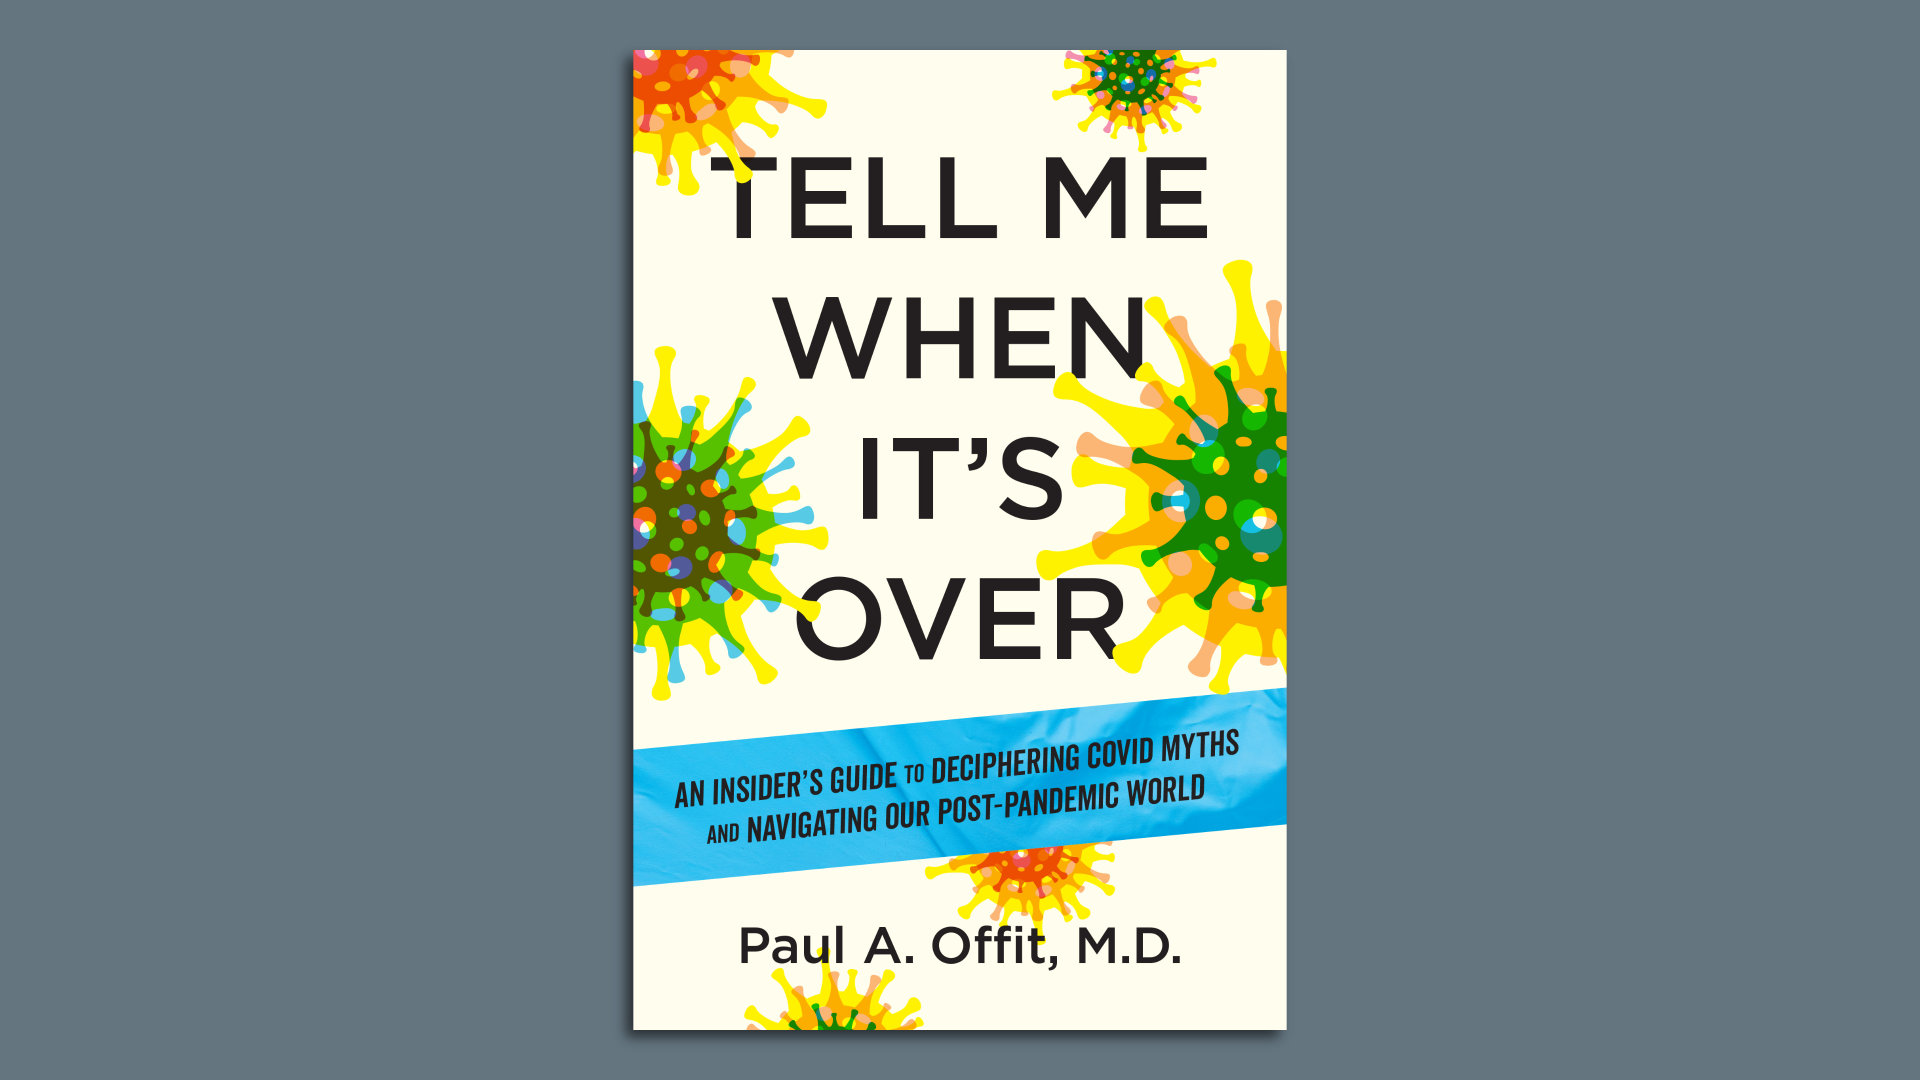 Book cover for "Tell Me When It's Over" by Paul A. Offit.